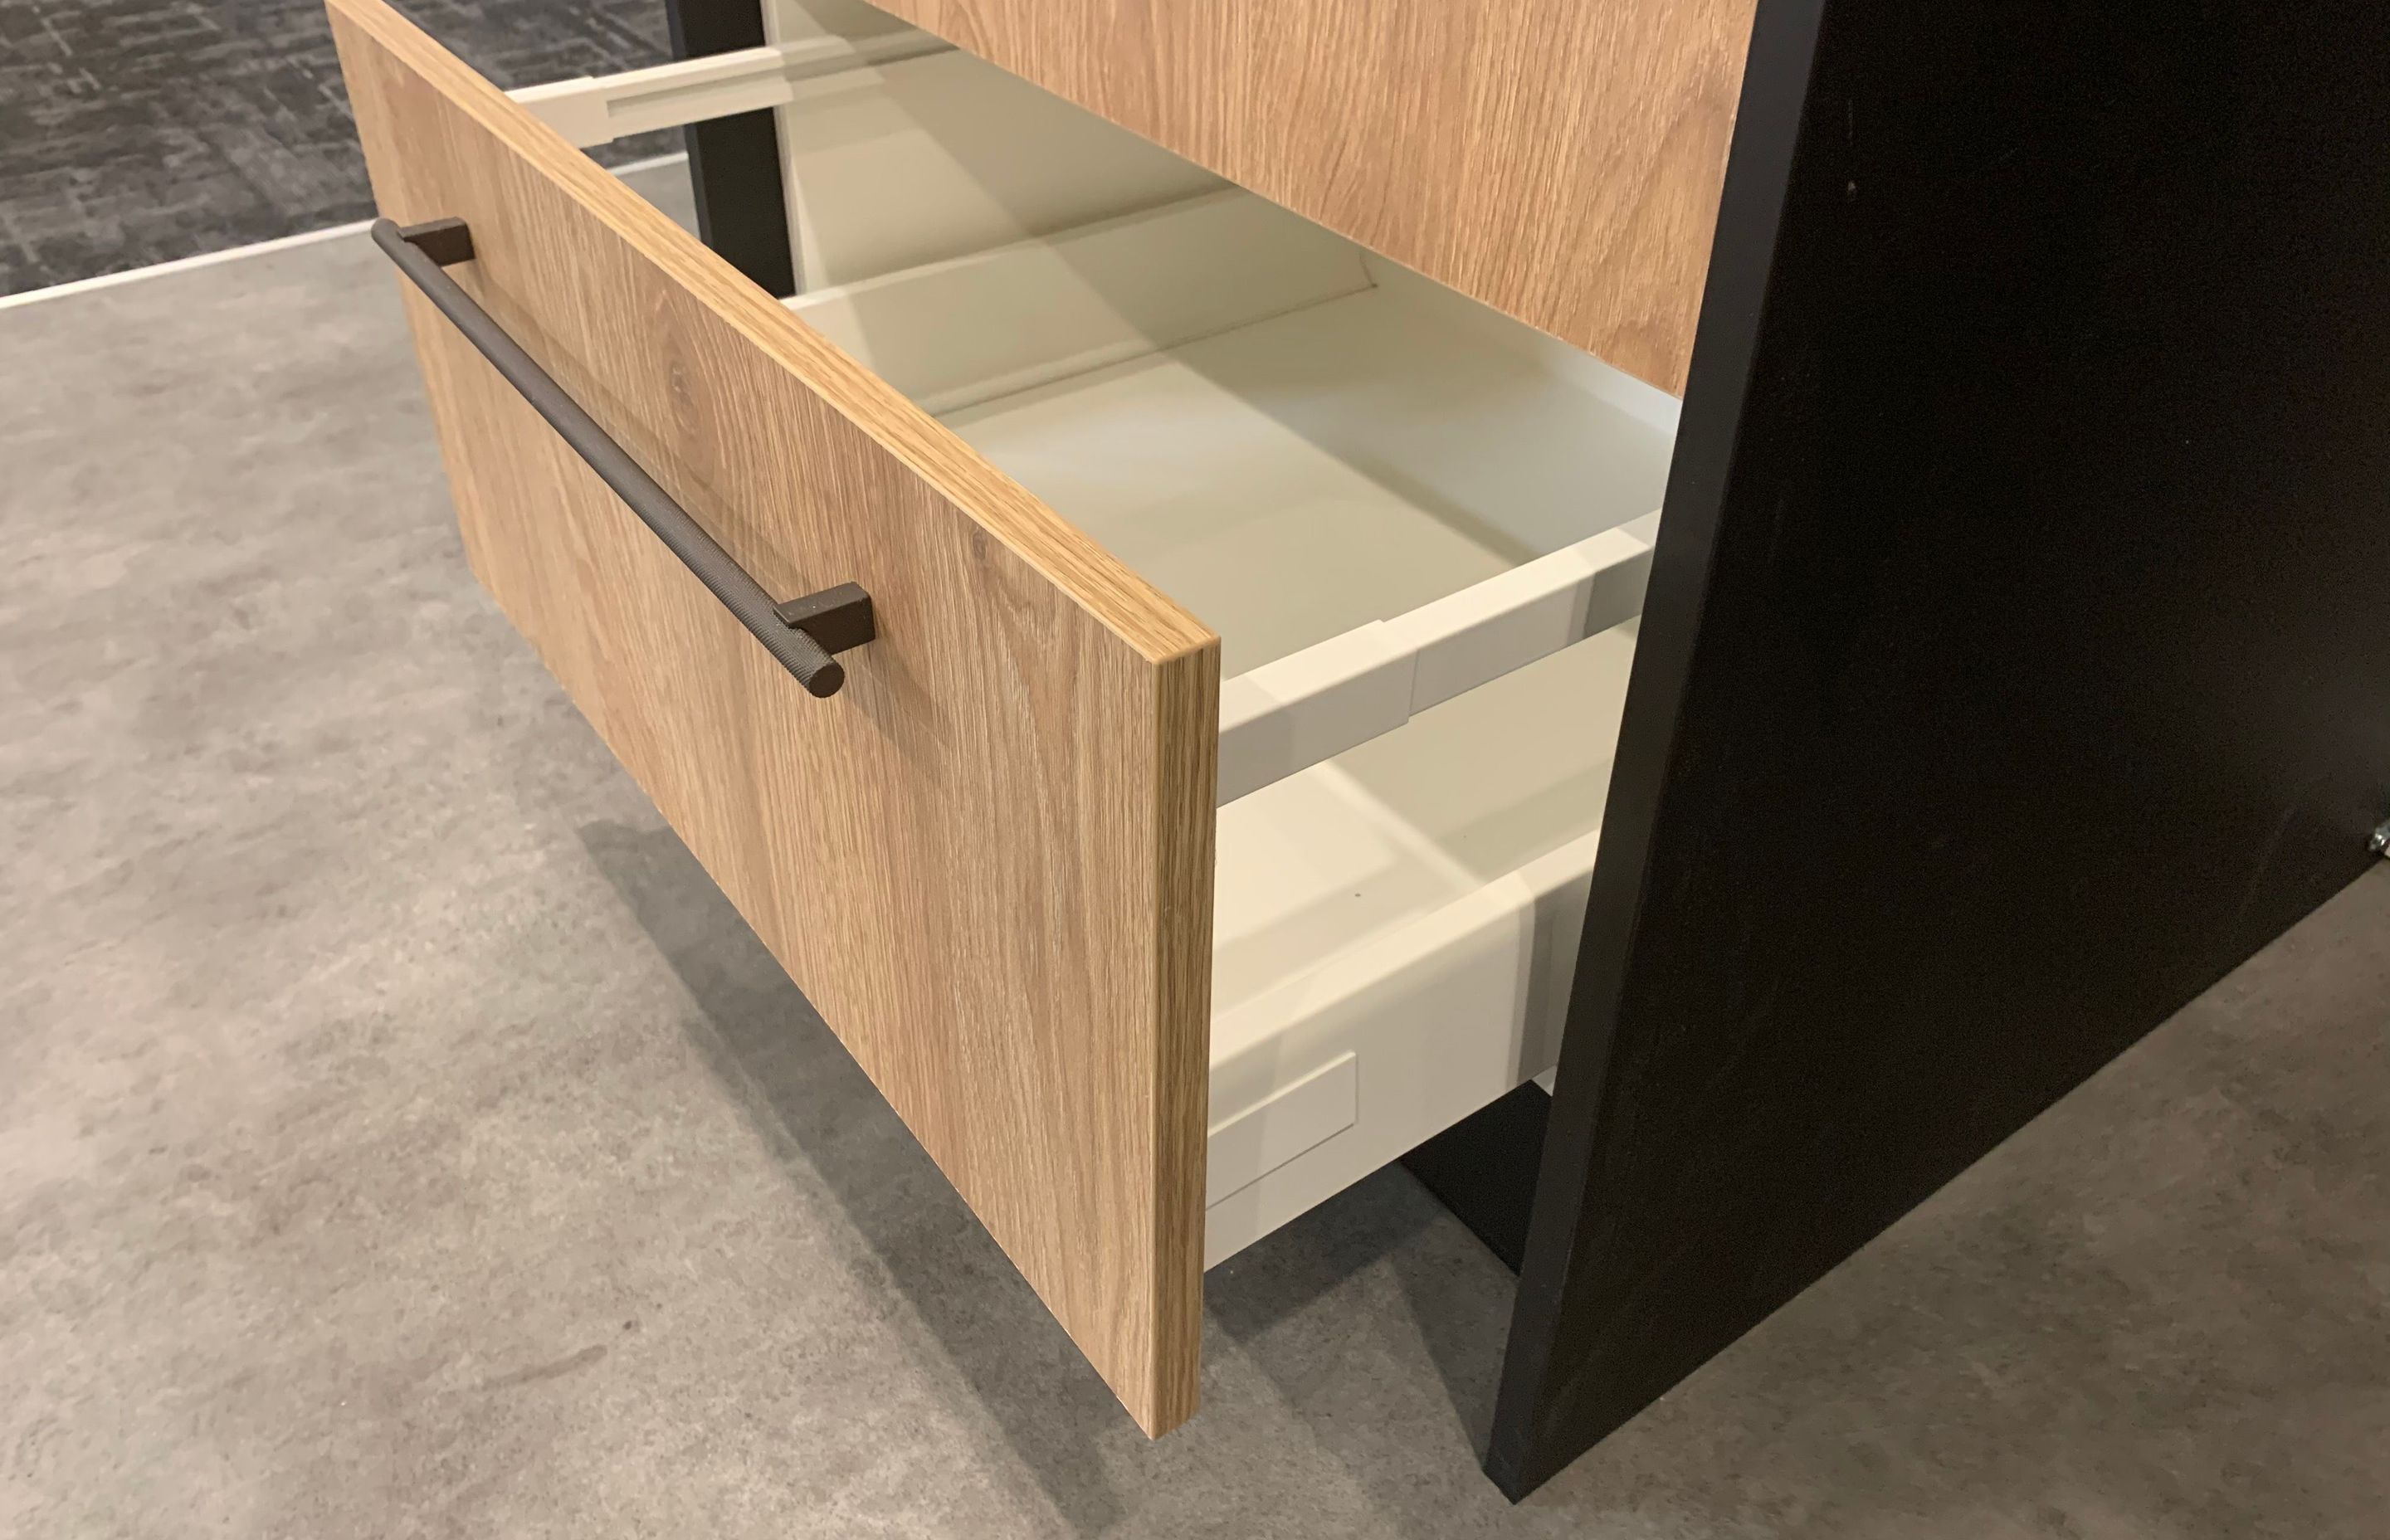 Fit Wellsford Kitchen - Harn Ritma Soft Close Drawers - Many Models - Also Available in Umbra Grey and with Round Railings